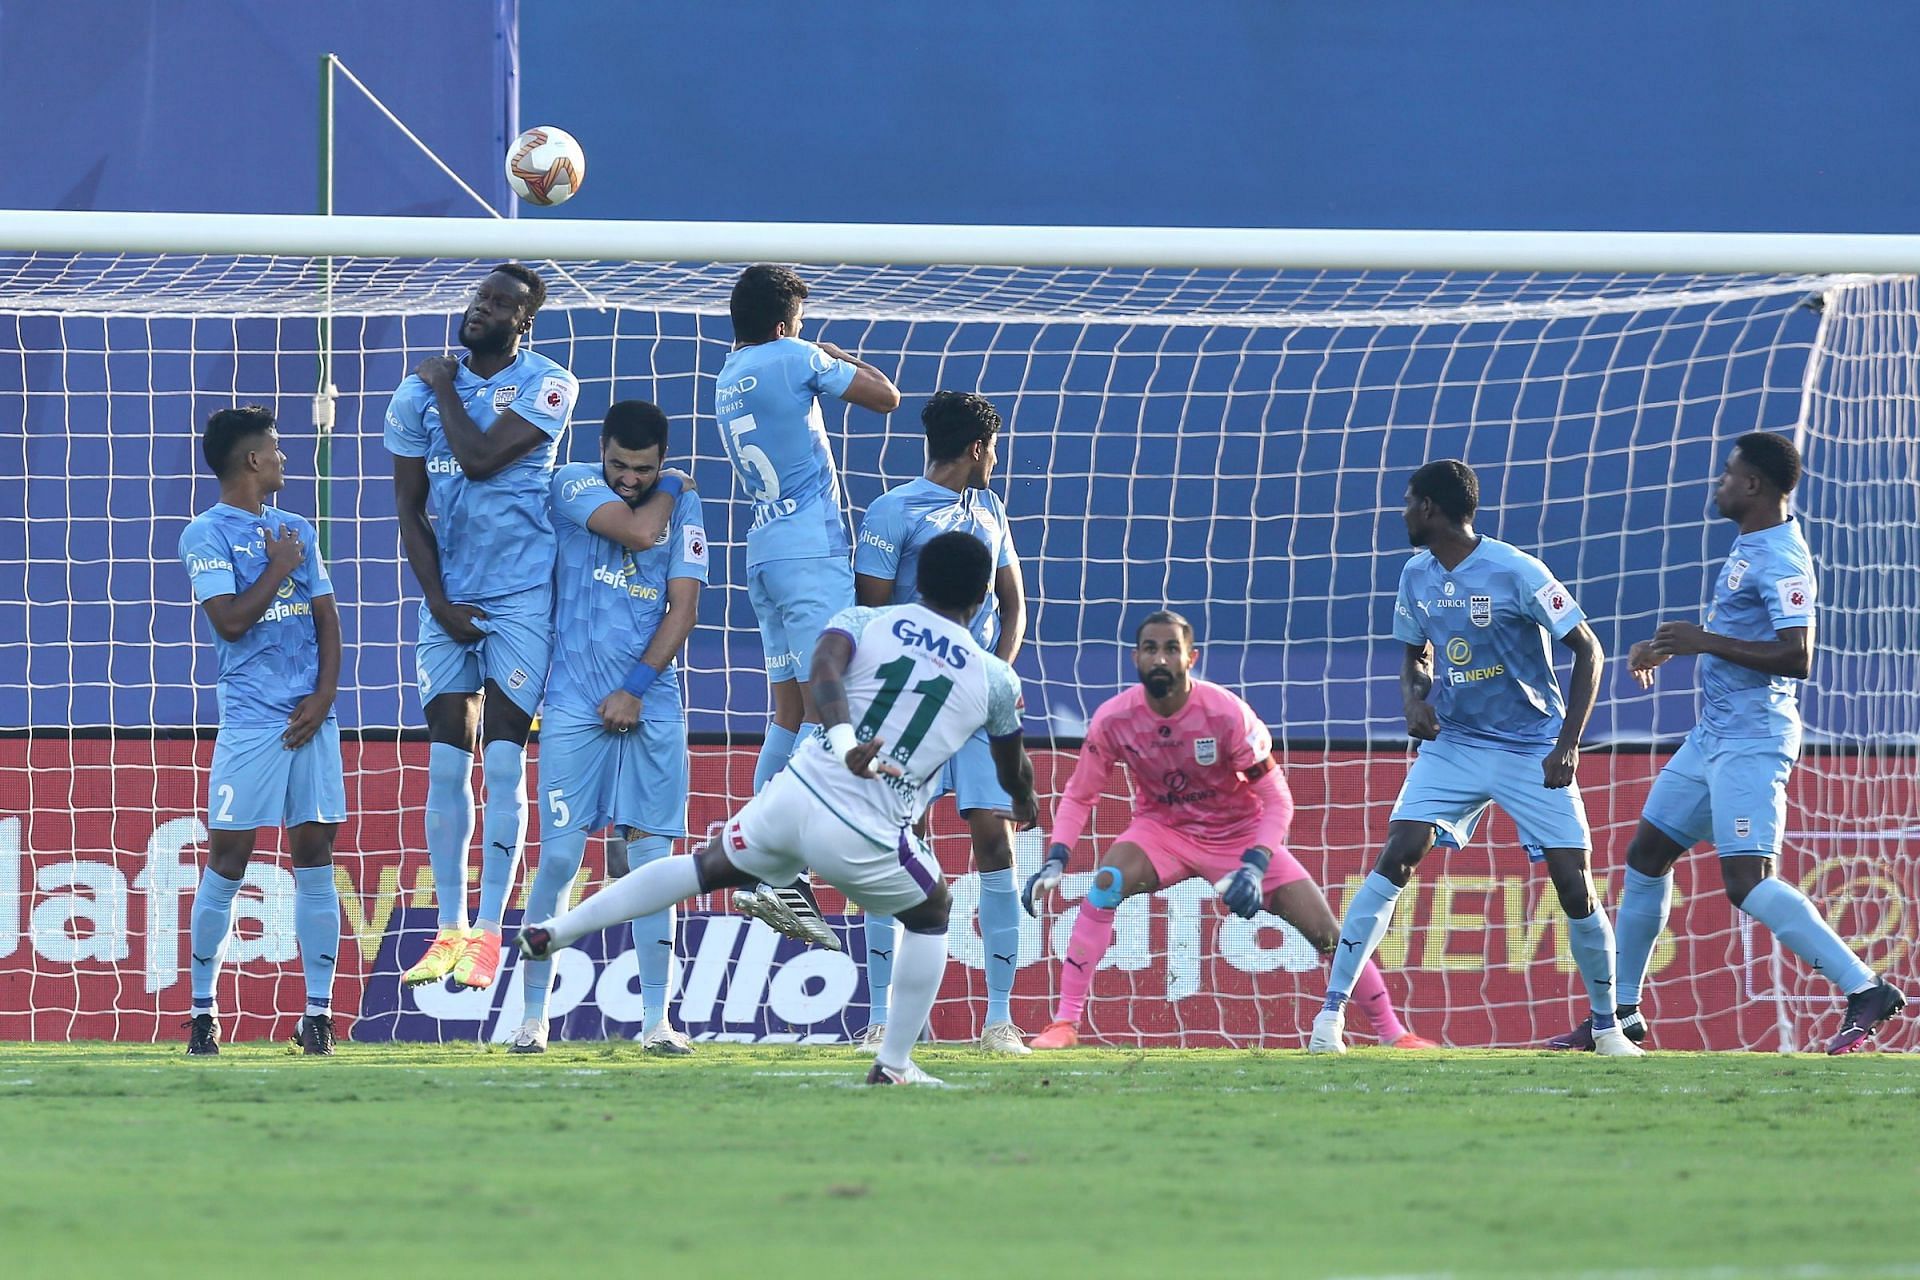 The Islanders got the better of the Juggernauts in the first leg of their clash last season. (Image Courtesy: ISL)